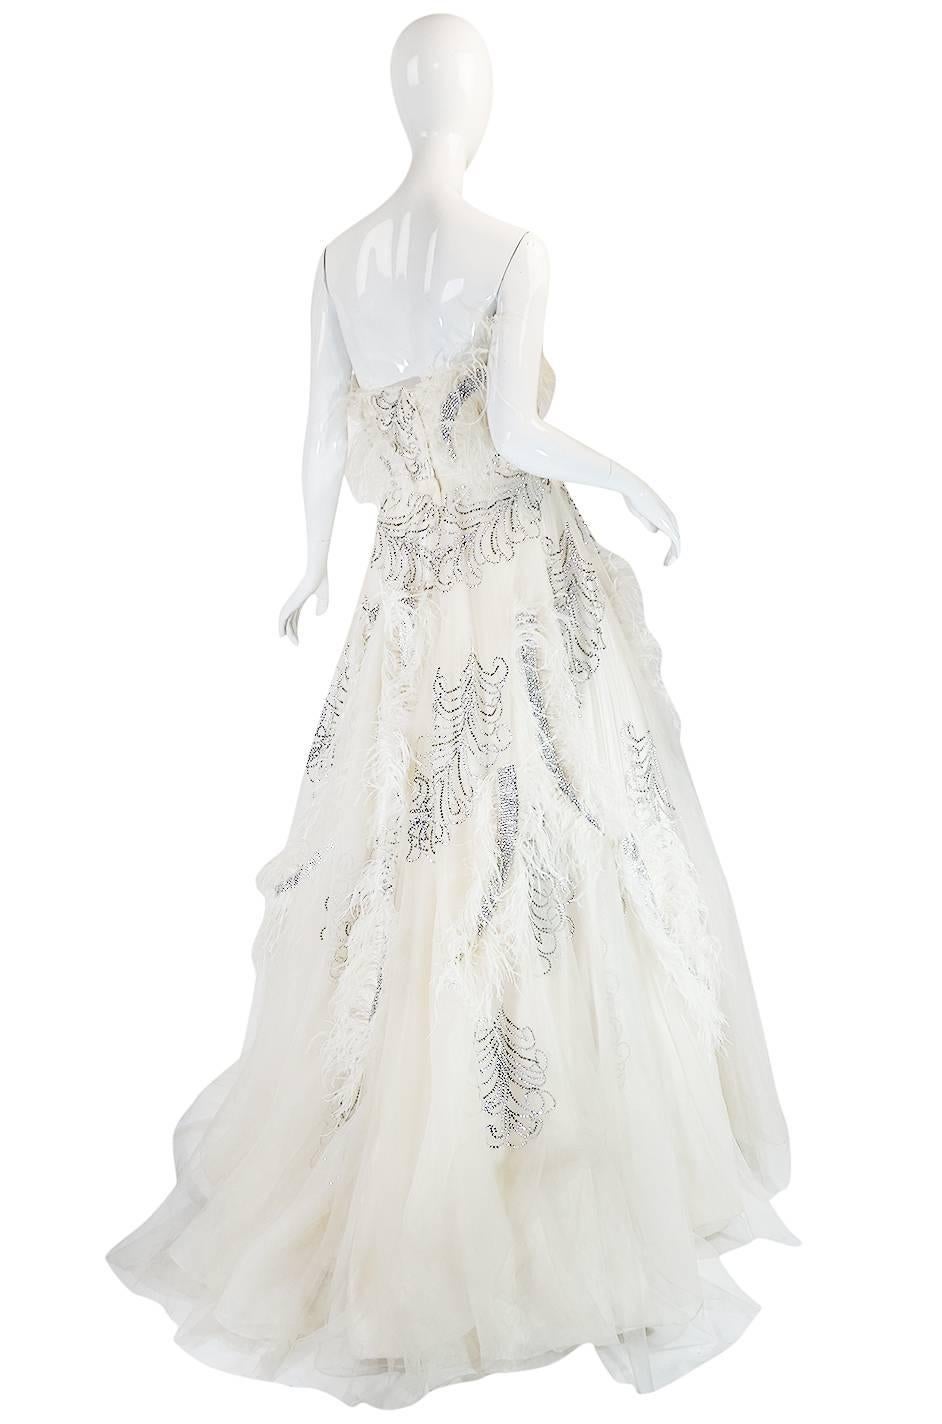 

This is an absolutely extraordinary vintage gown that is a once in a life time find. In person, the texture and depth created by the extravagant feathers and rhinestone applique, combined with the layers and layers of silk and net, is just